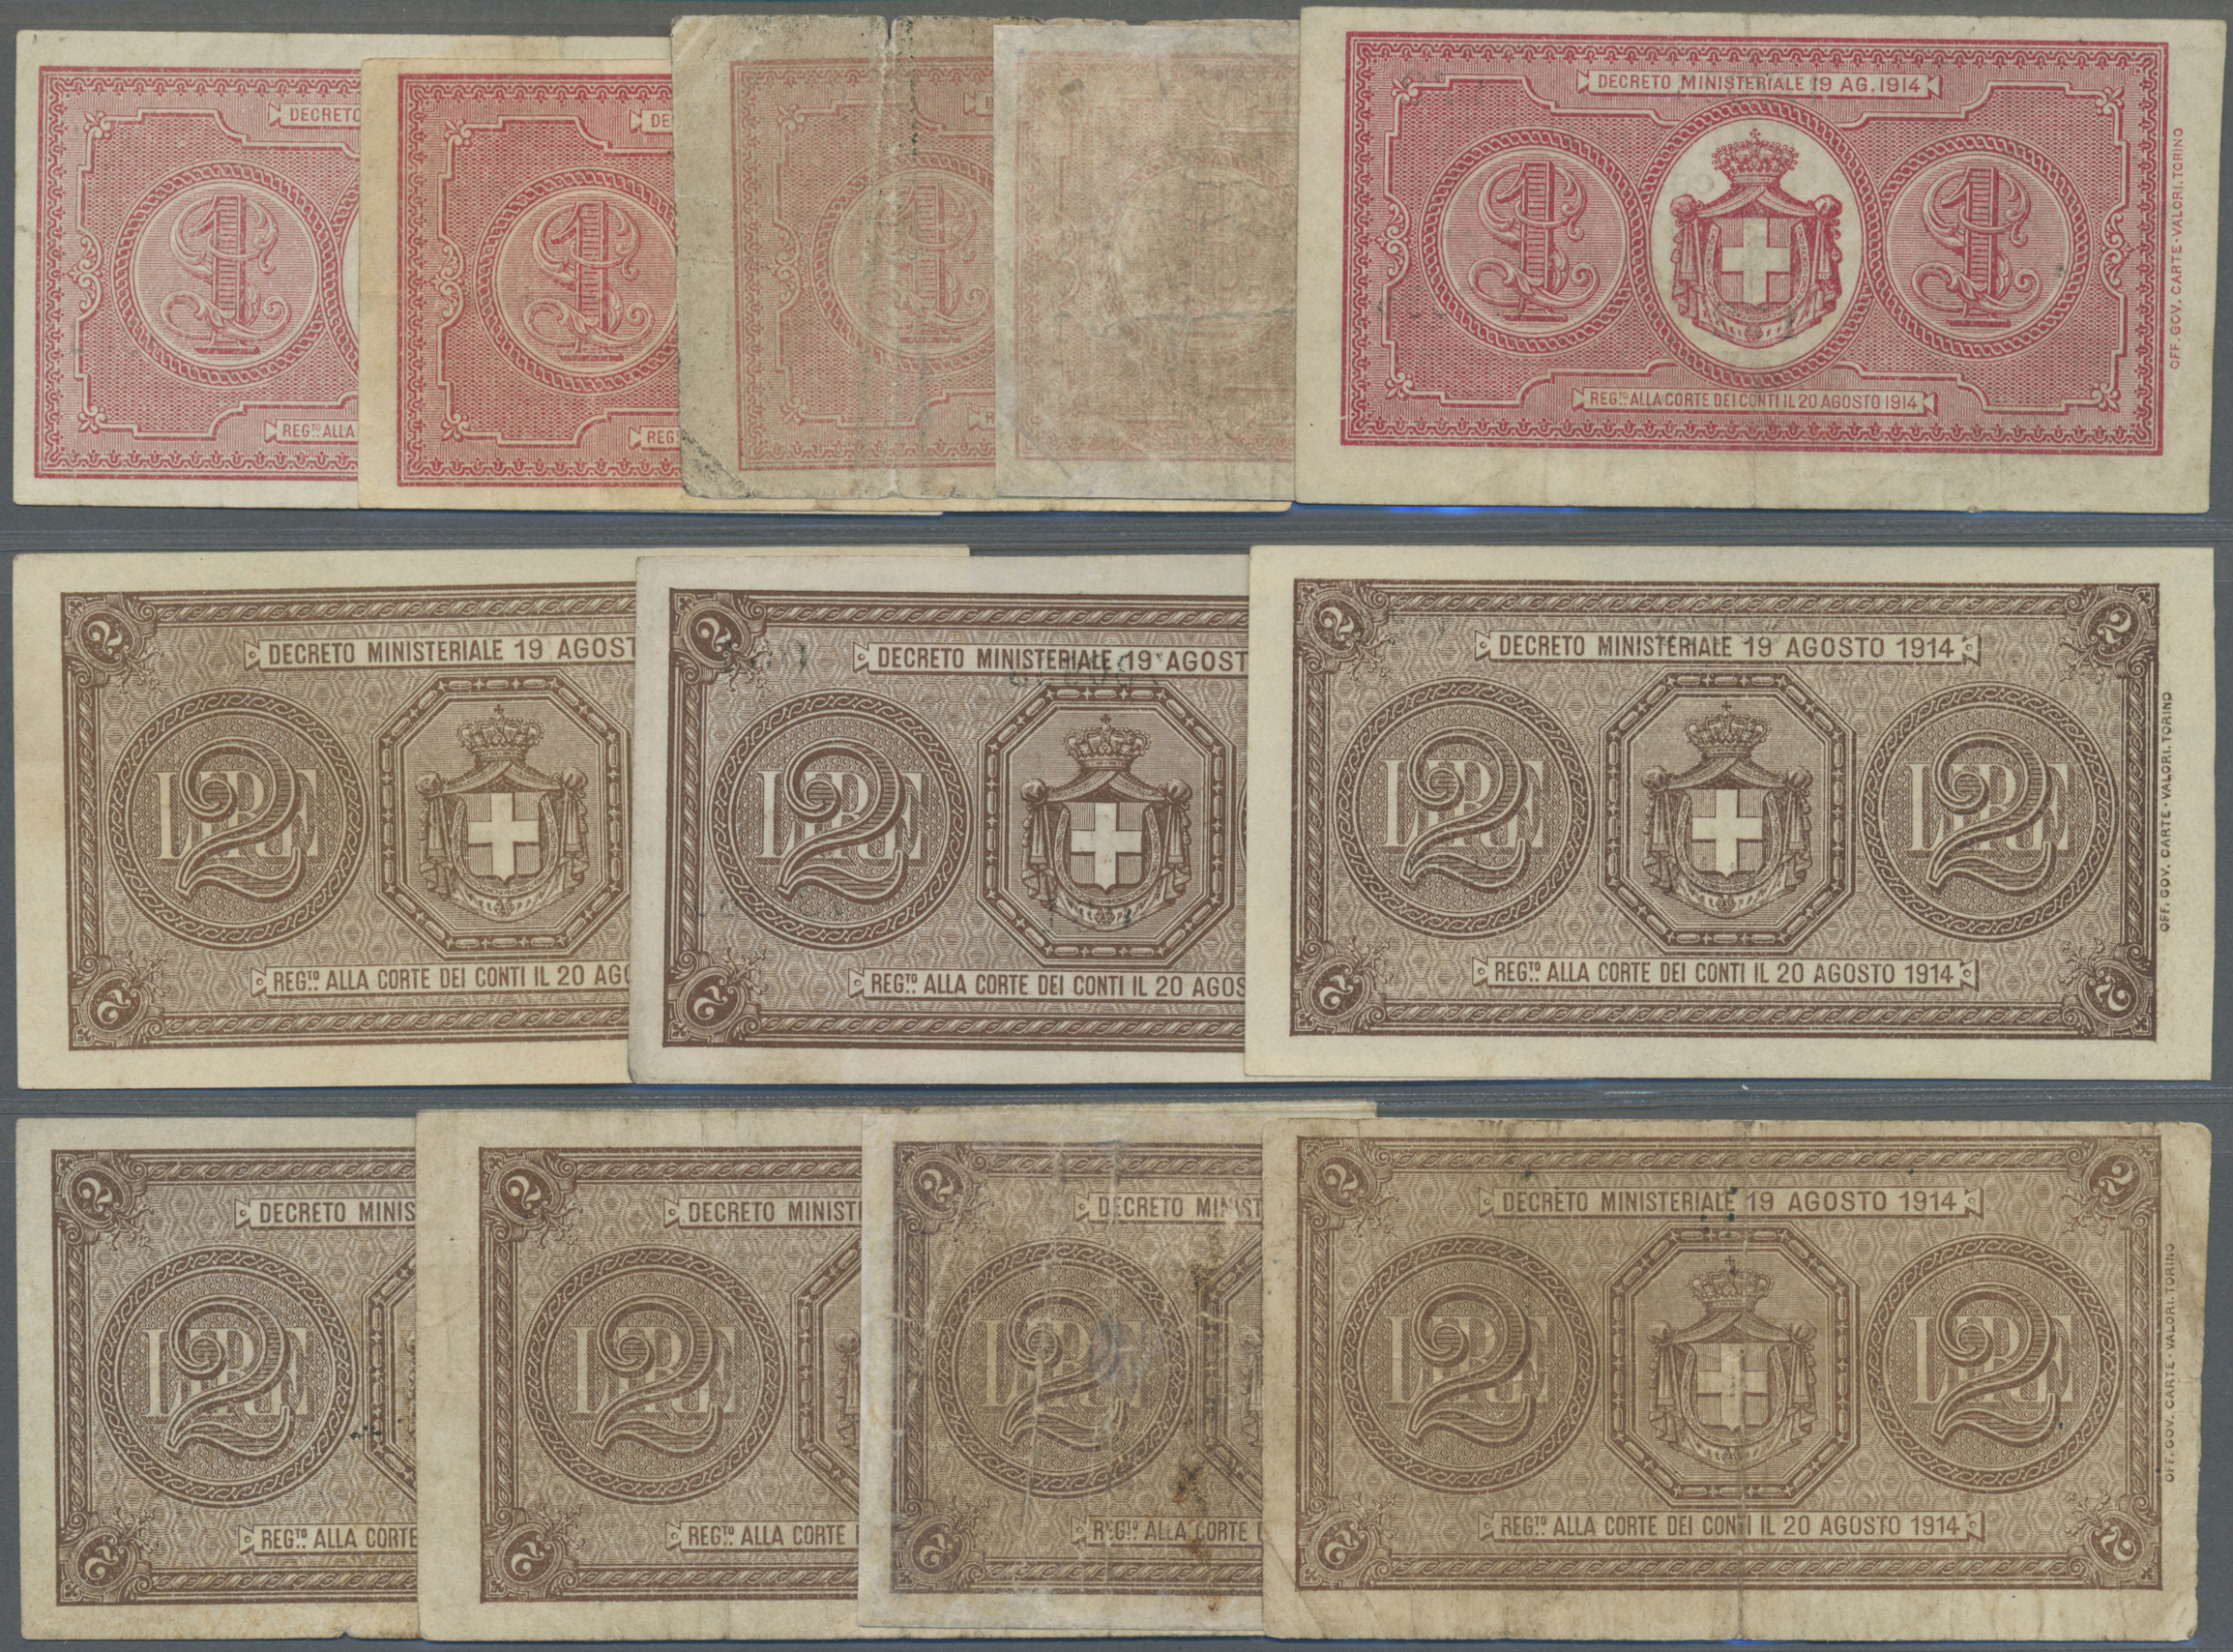 Lot 00453 - Italy / Italien | Banknoten  -  Auktionshaus Christoph Gärtner GmbH & Co. KG Sale #48 The Banknotes